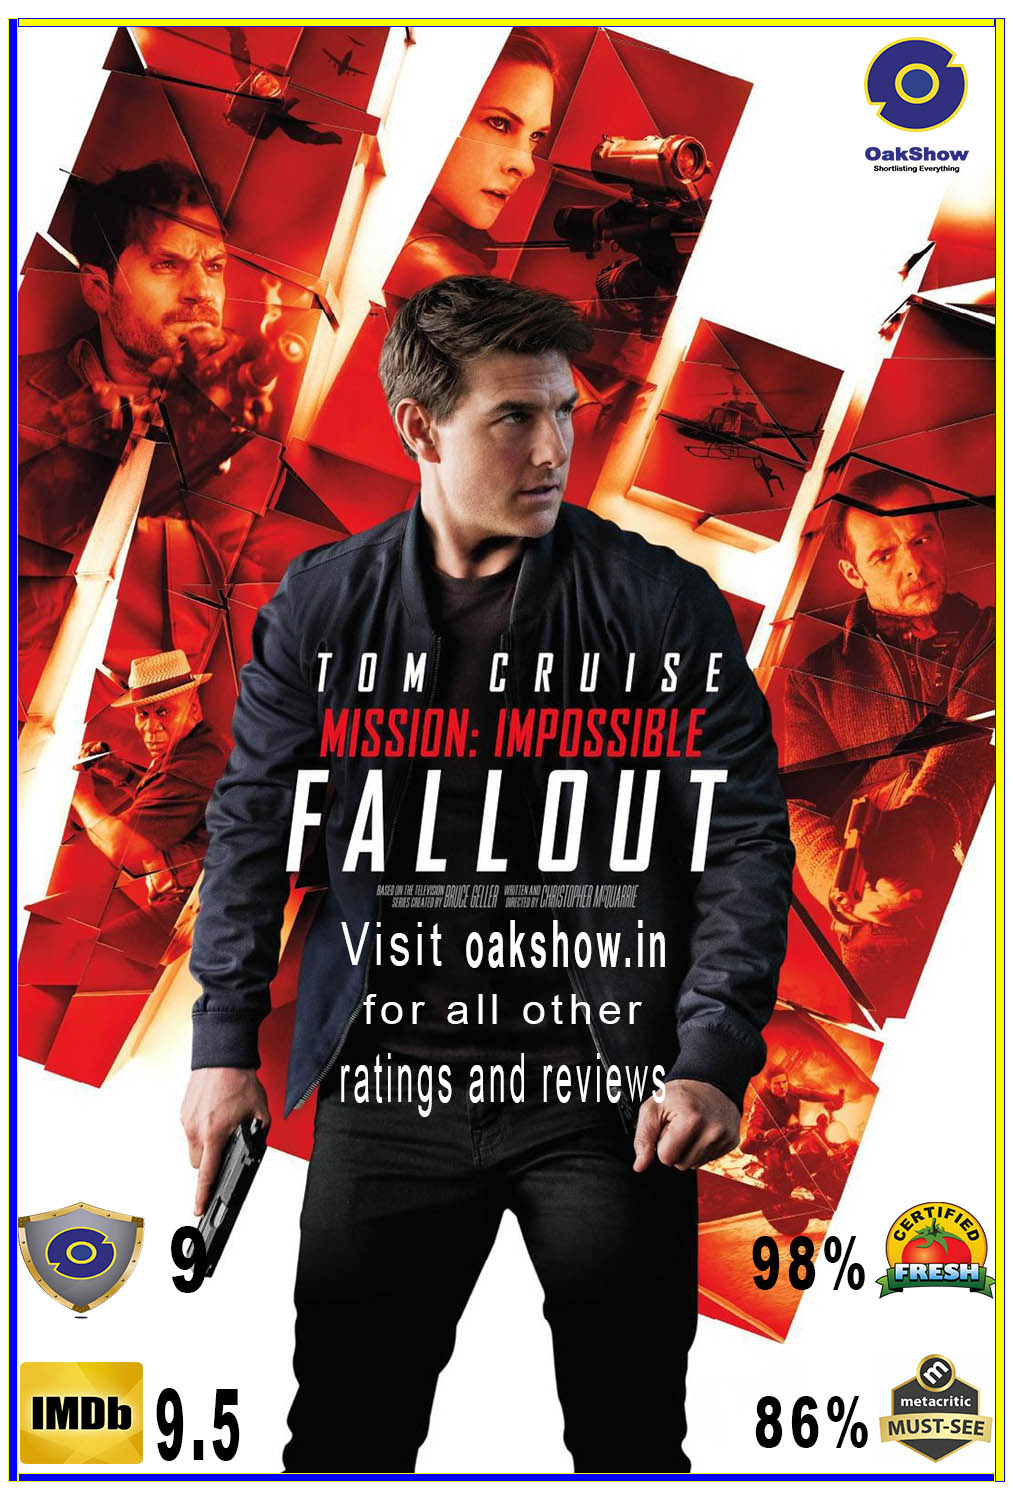 The Old Guard and Mission: Impossible – Fallout